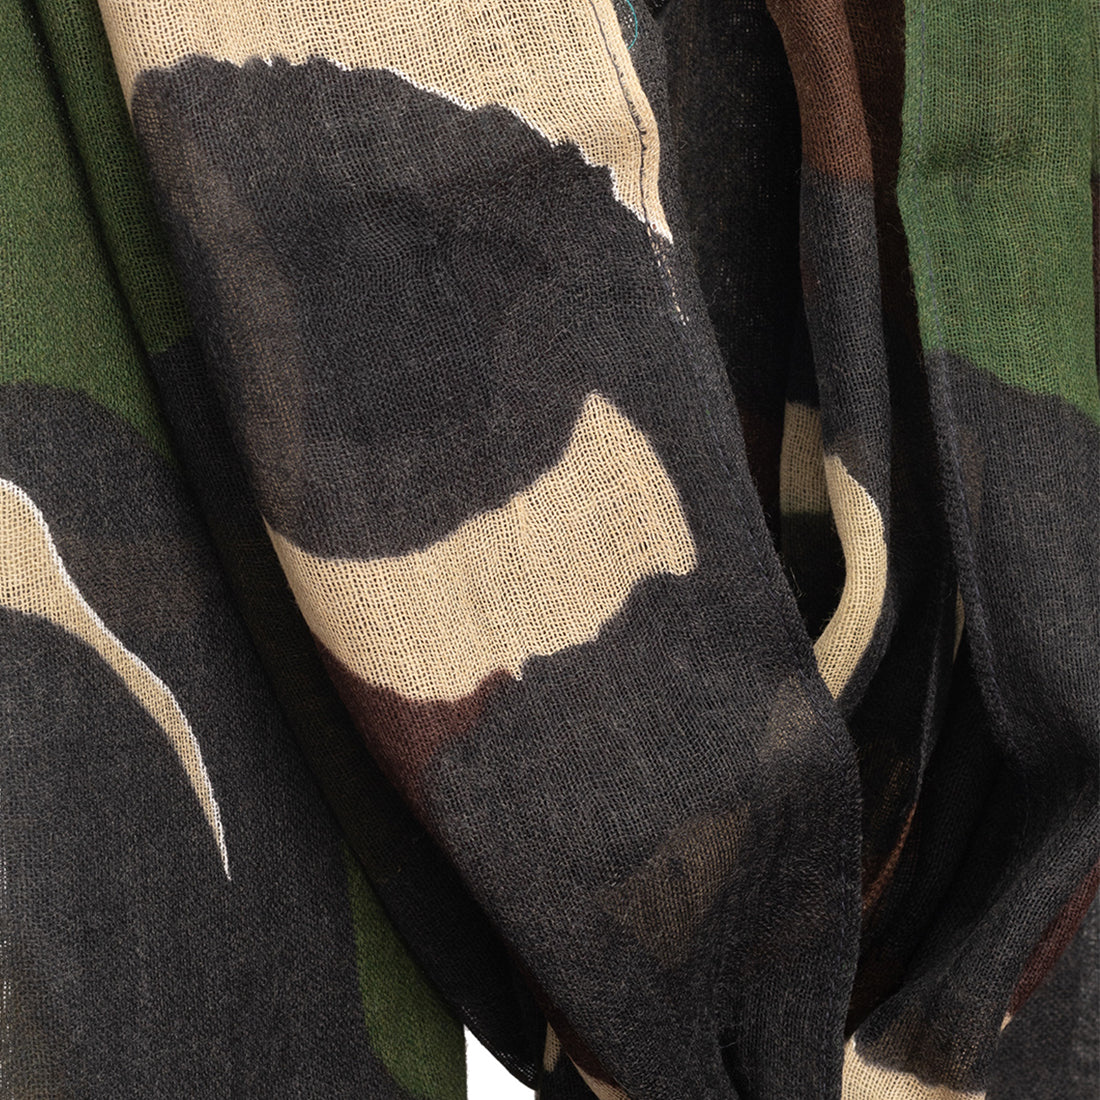 Fashion-Forward Woolen Camouflage Scarf Merges With A Bold, Contemporary Design.